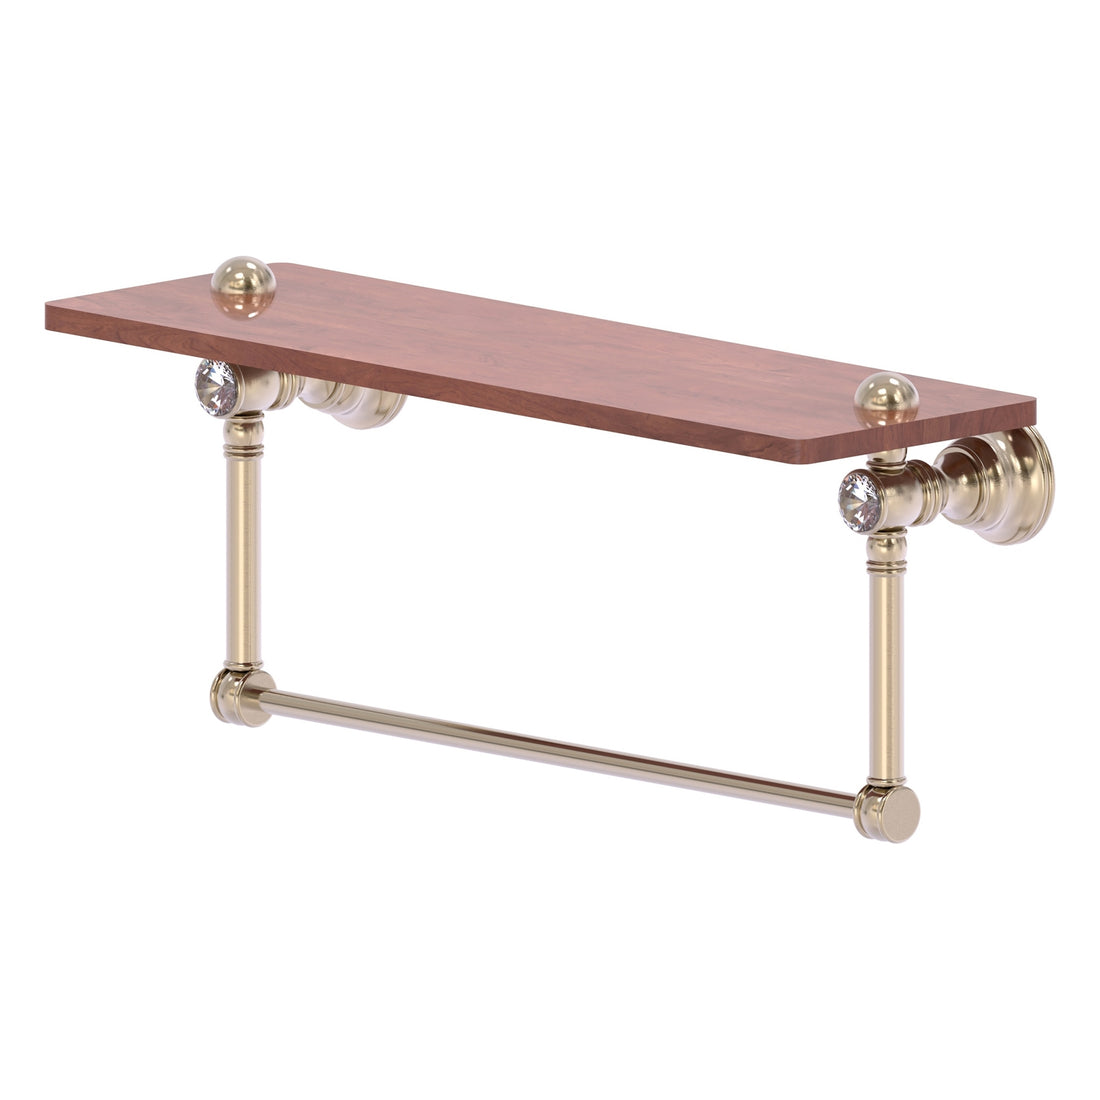 Brass and wood shelf with towel bar